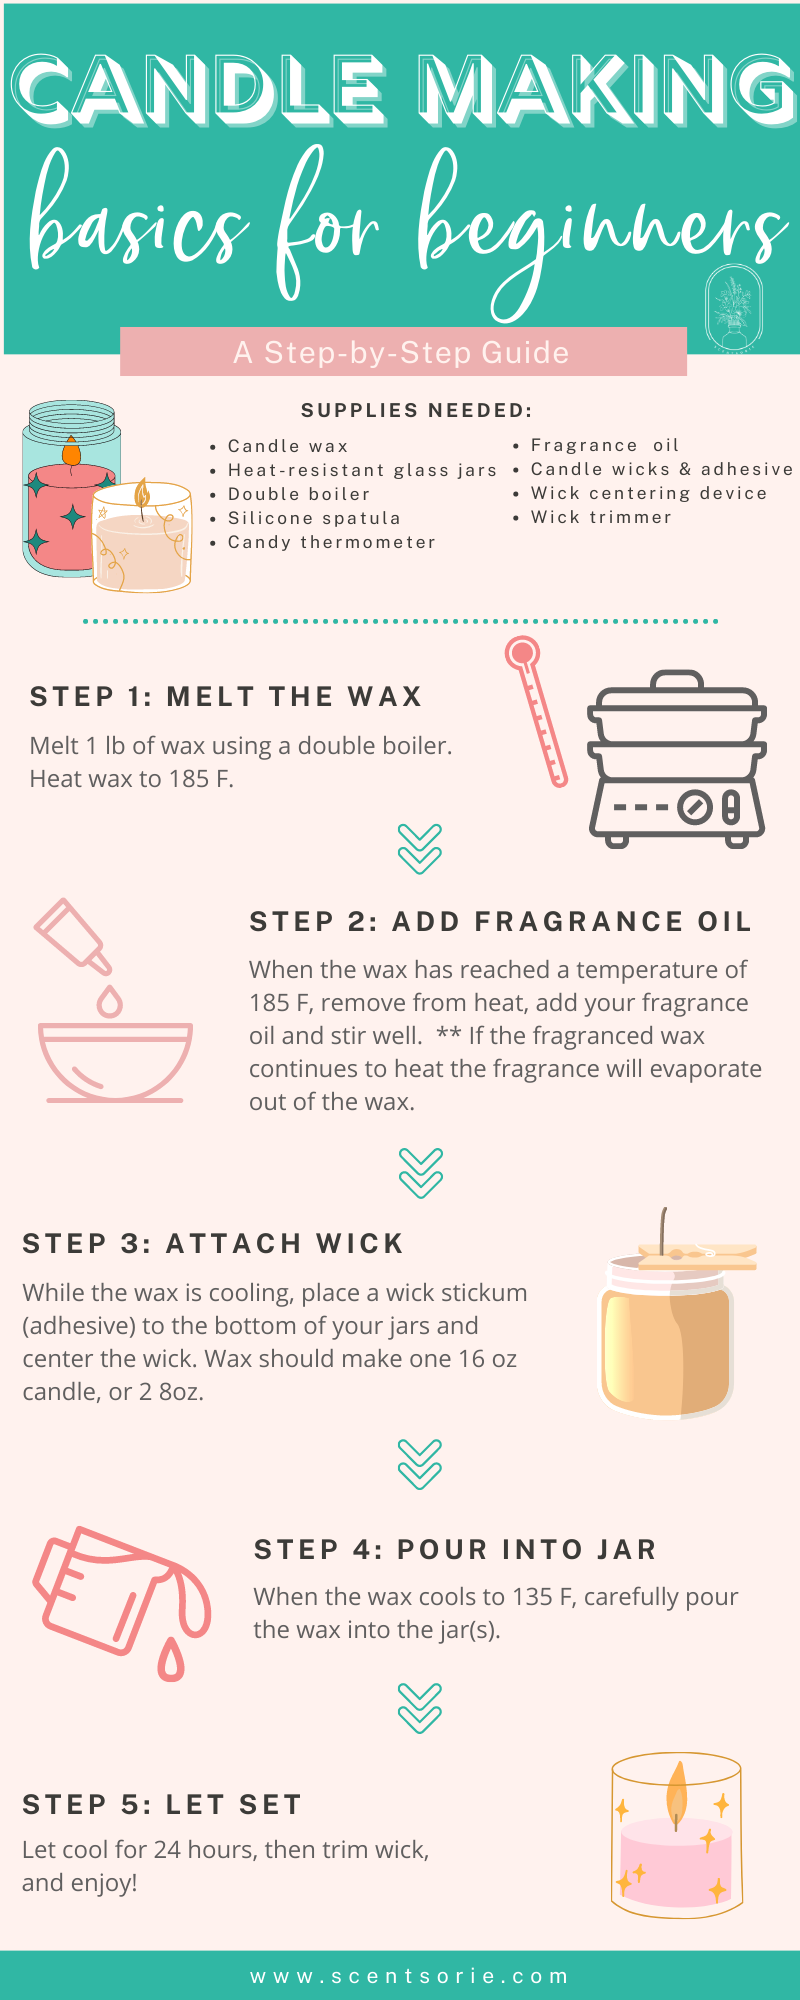 https://cdn.shopify.com/s/files/1/0237/6584/4045/files/Candle_Making_Basics_Infographic_4_2048x2048.png?v=1684001192